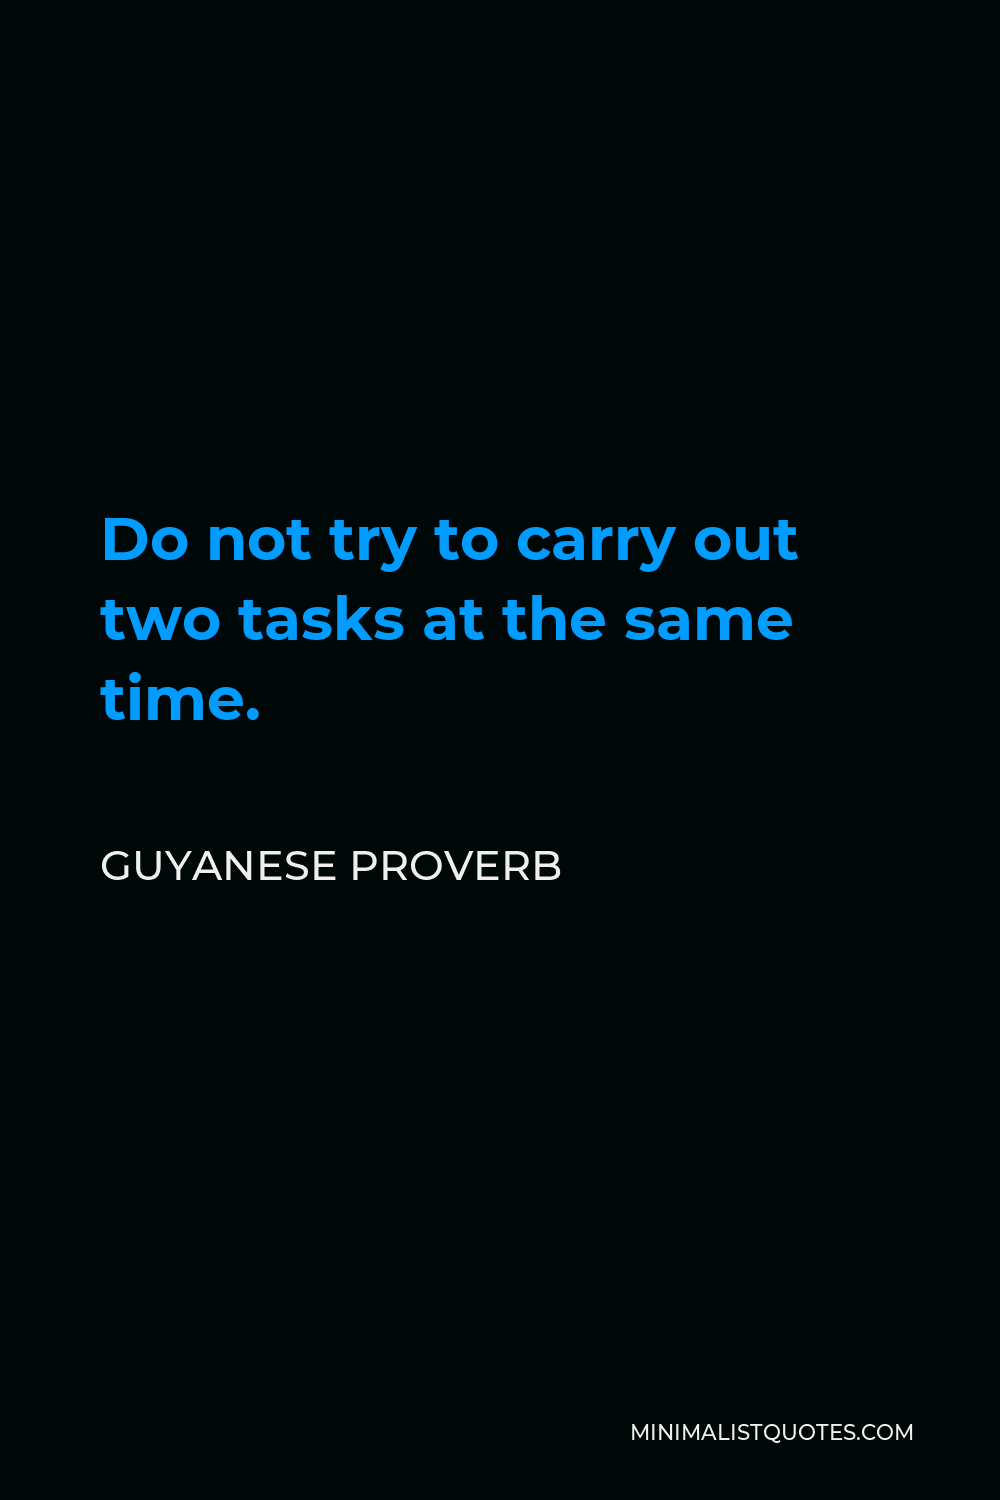 Guyanese Proverb Quote - Do not try to carry out two tasks at the same time.